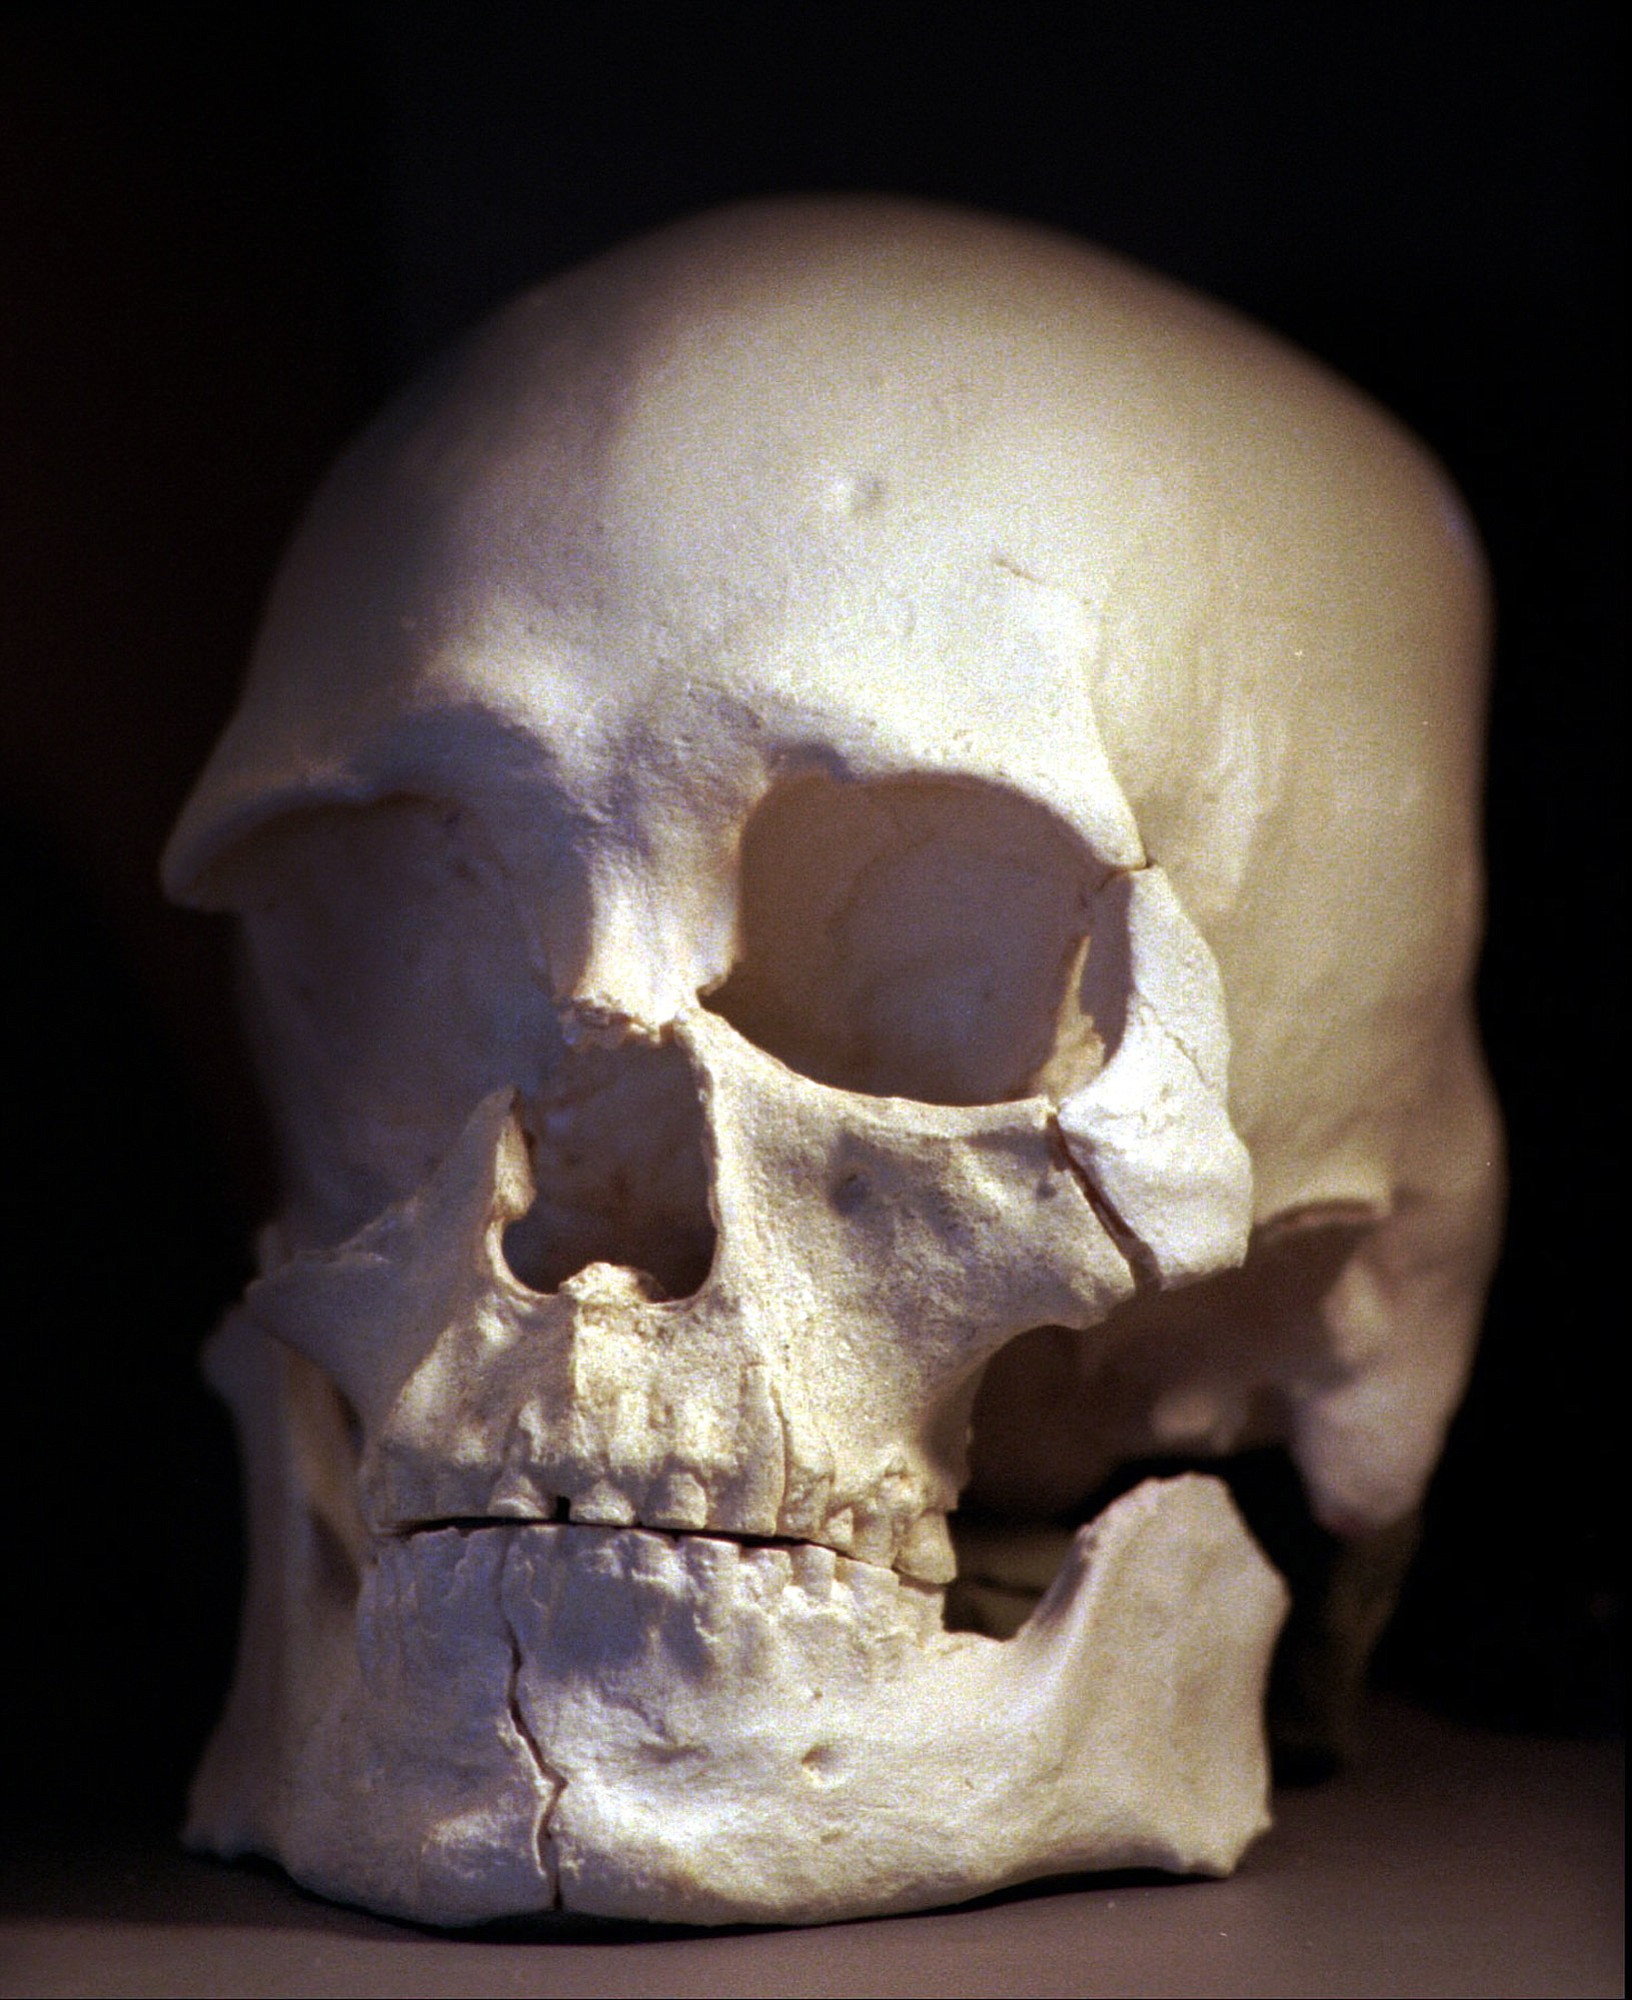 Associated Press files
The ancient skeleton known as Kennewick Man, found nearly 20 years ago in a river in Washington, is related to Native Americans, says a DNA study published Thursday.